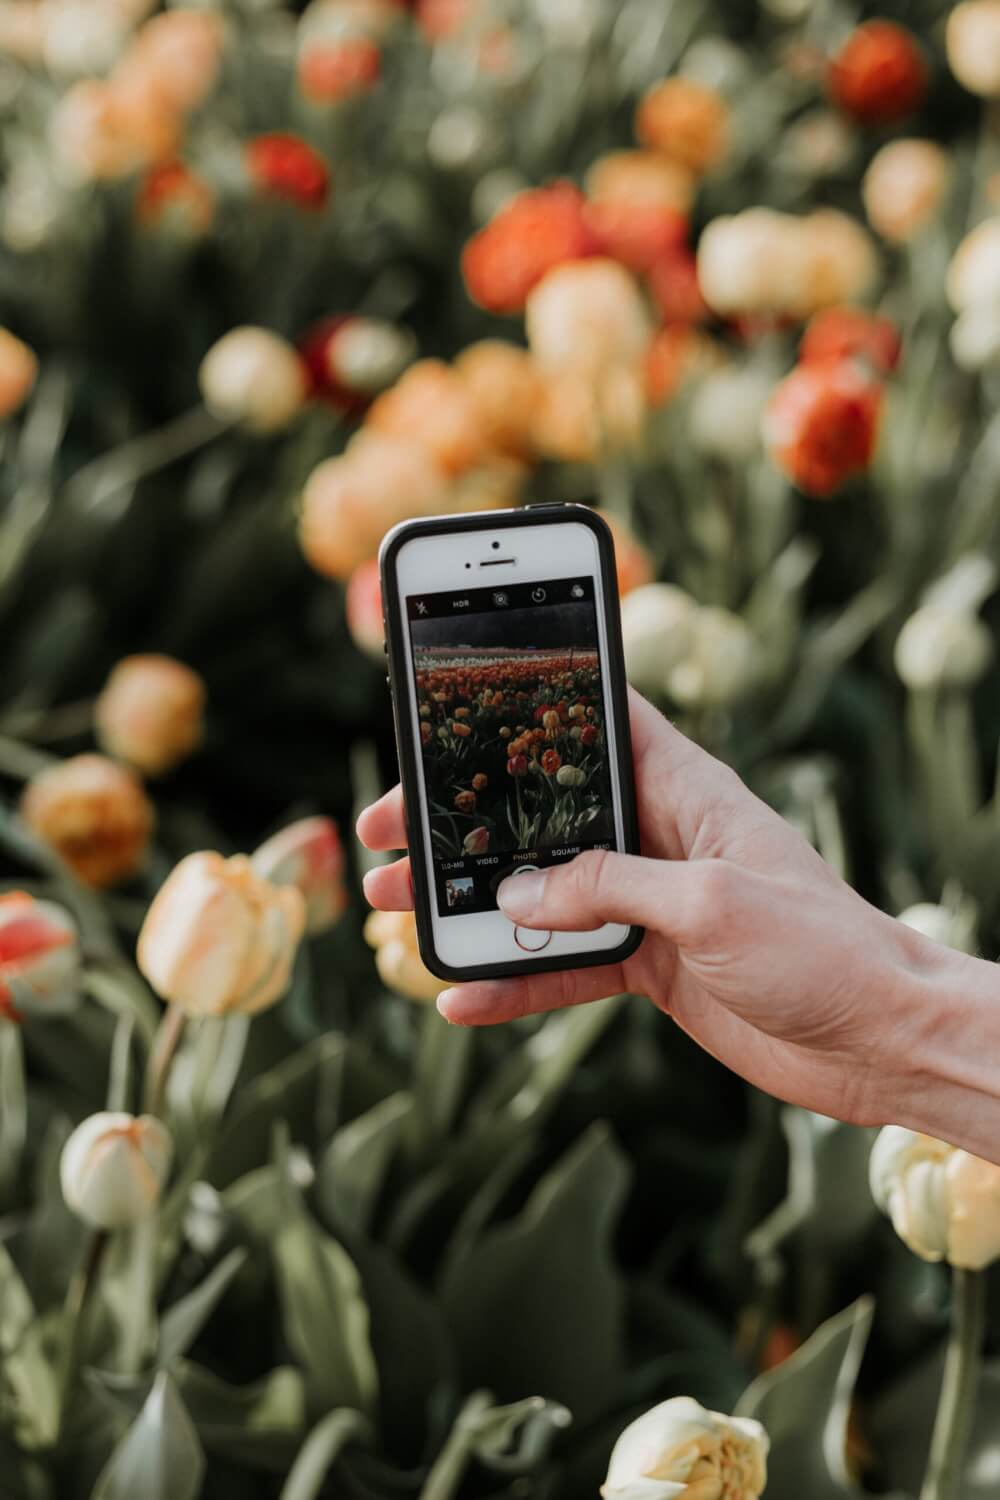 iPhone taking a photo of tulips